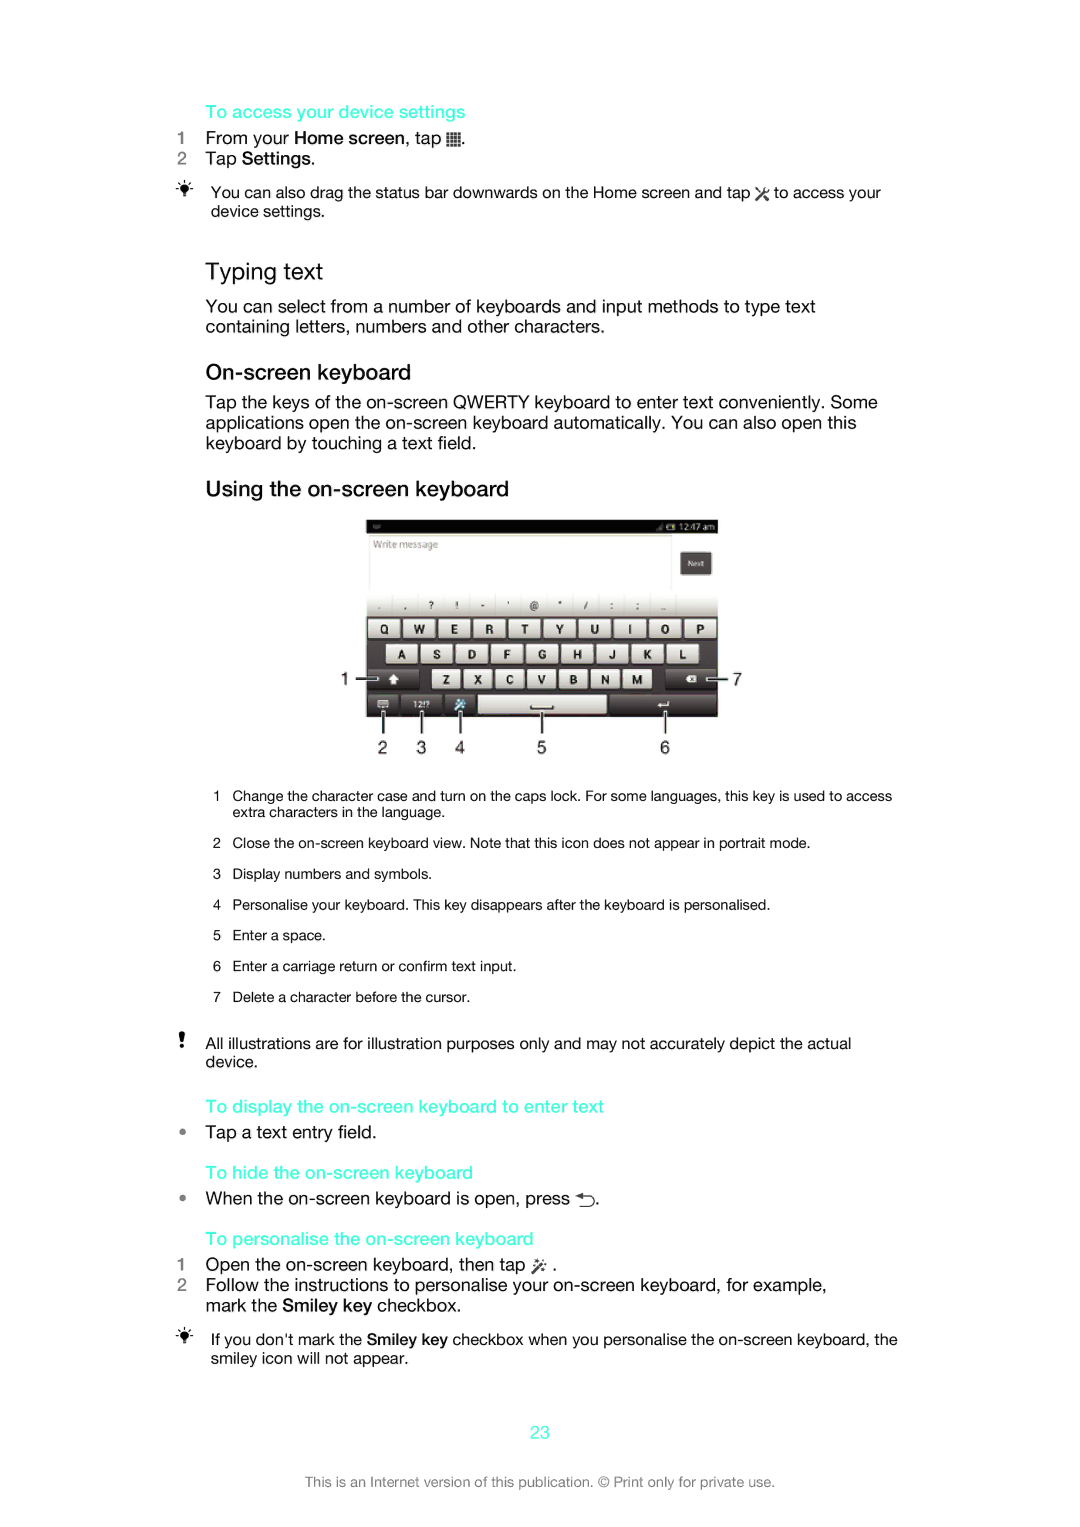 Sony 1266-1565 manual Typing text, On-screen keyboard, Using the on-screen keyboard 